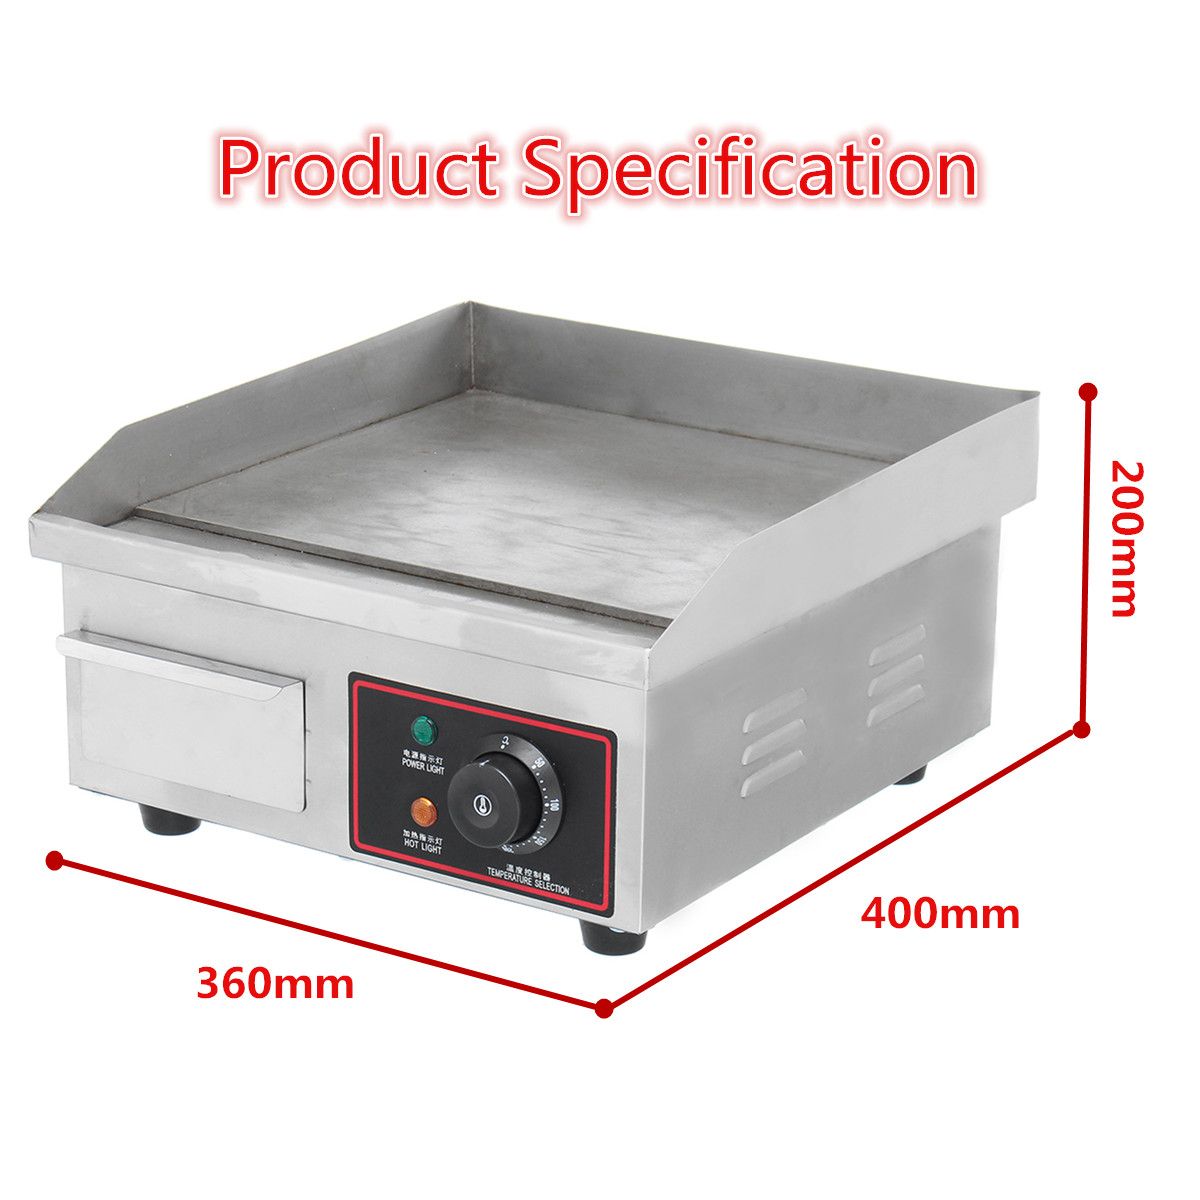 1500W-110V-Electric-Countertop-Griddle-Commercial-Restaurant-Flat-Top-Grill-BBQ-1334353